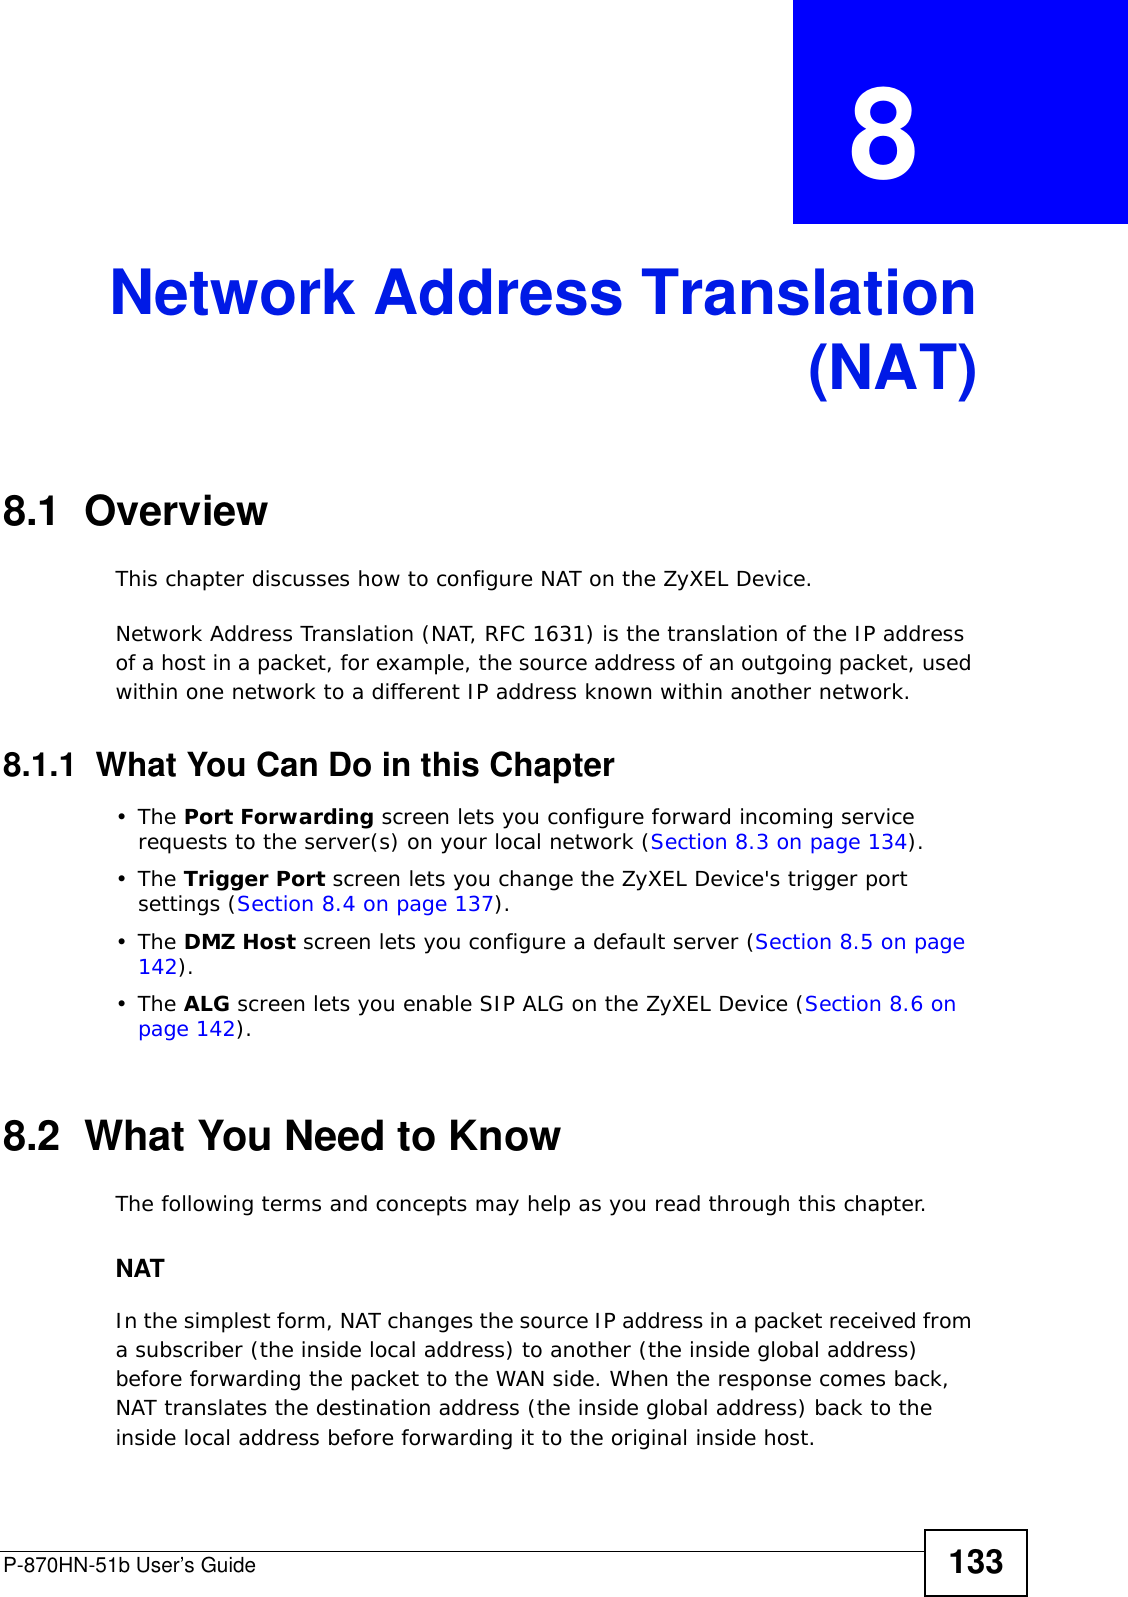 P-870HN-51b User’s Guide 133CHAPTER  8 Network Address Translation(NAT)8.1  Overview This chapter discusses how to configure NAT on the ZyXEL Device.Network Address Translation (NAT, RFC 1631) is the translation of the IP address of a host in a packet, for example, the source address of an outgoing packet, used within one network to a different IP address known within another network. 8.1.1  What You Can Do in this Chapter•The Port Forwarding screen lets you configure forward incoming service requests to the server(s) on your local network (Section 8.3 on page 134).•The Trigger Port screen lets you change the ZyXEL Device&apos;s trigger port settings (Section 8.4 on page 137).•The DMZ Host screen lets you configure a default server (Section 8.5 on page 142).•The ALG screen lets you enable SIP ALG on the ZyXEL Device (Section 8.6 on page 142).8.2  What You Need to KnowThe following terms and concepts may help as you read through this chapter.NATIn the simplest form, NAT changes the source IP address in a packet received from a subscriber (the inside local address) to another (the inside global address) before forwarding the packet to the WAN side. When the response comes back, NAT translates the destination address (the inside global address) back to the inside local address before forwarding it to the original inside host.